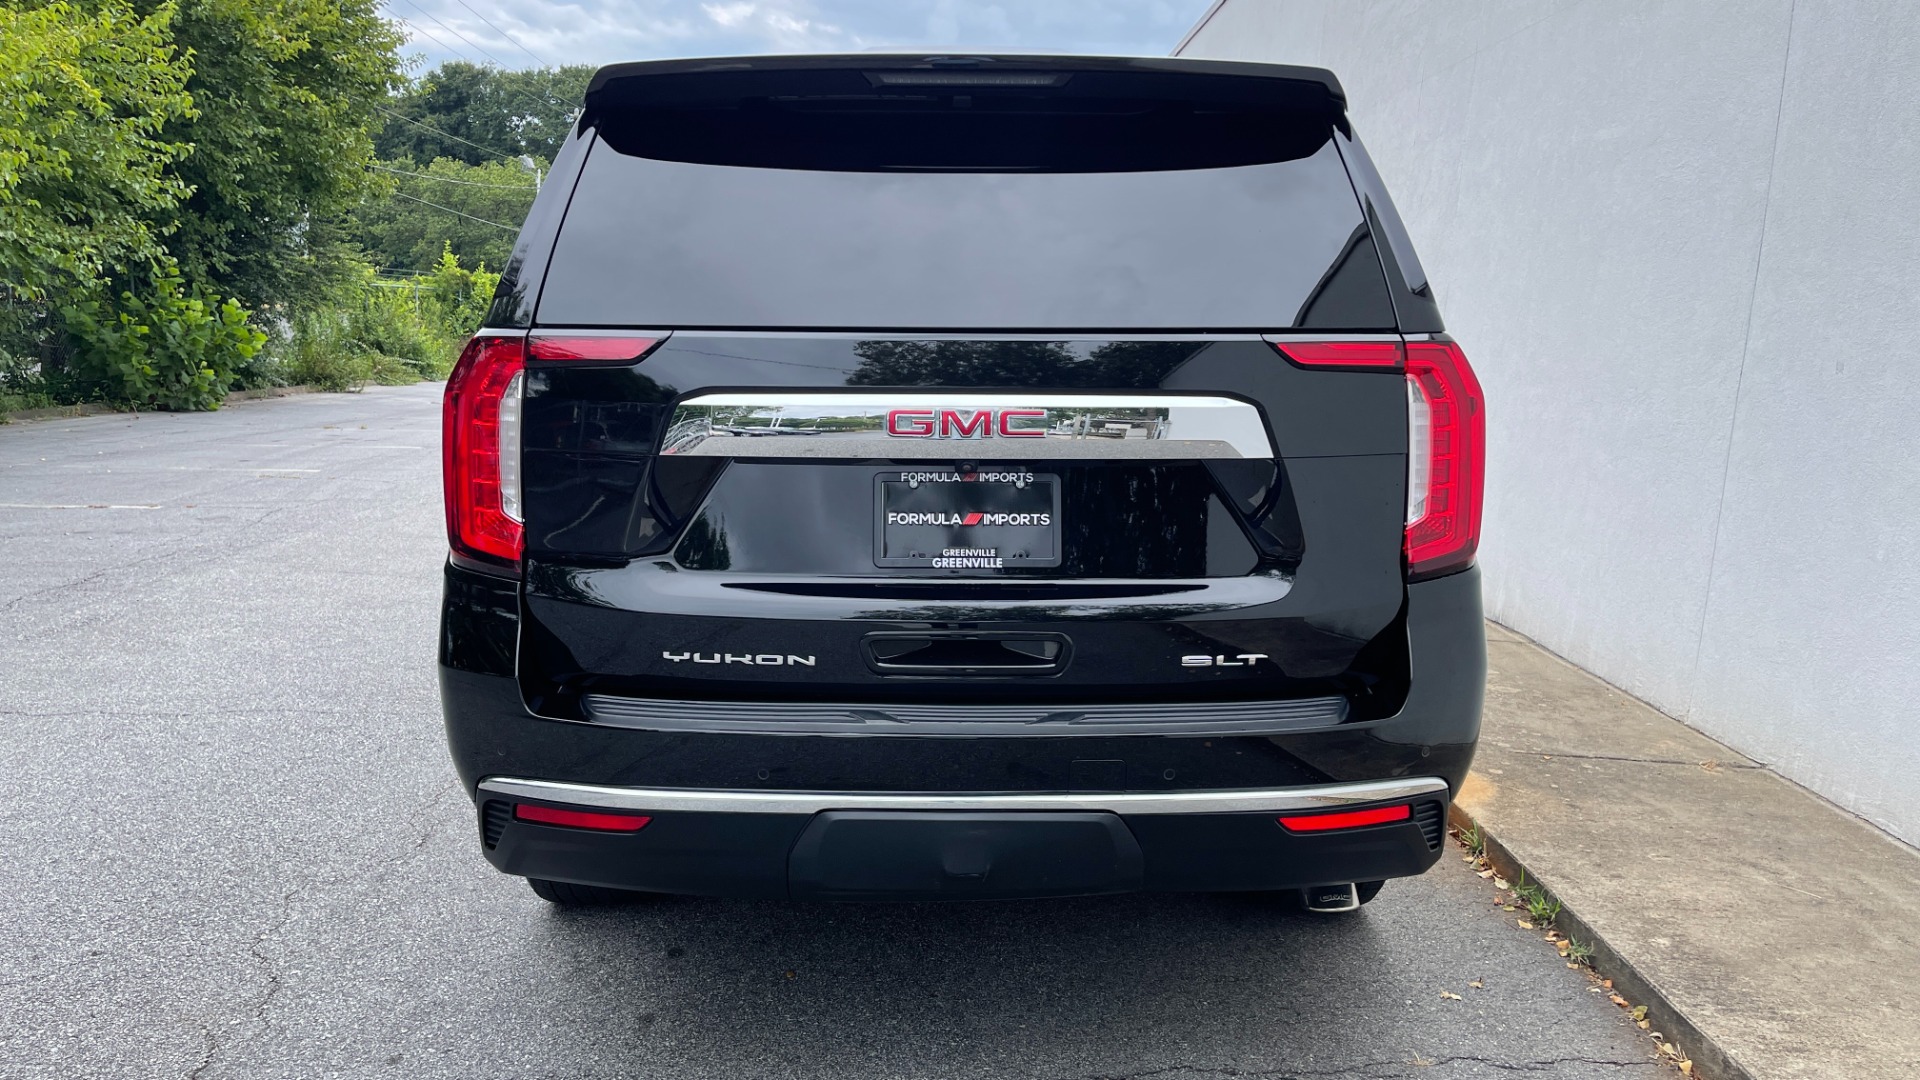 Used 2021 GMC Yukon SLT / REAR ENTERTAINMENT / 22IN WHEELS / LUXURY PLUS PACKAGE / 4WD for sale $69,995 at Formula Imports in Charlotte NC 28227 5